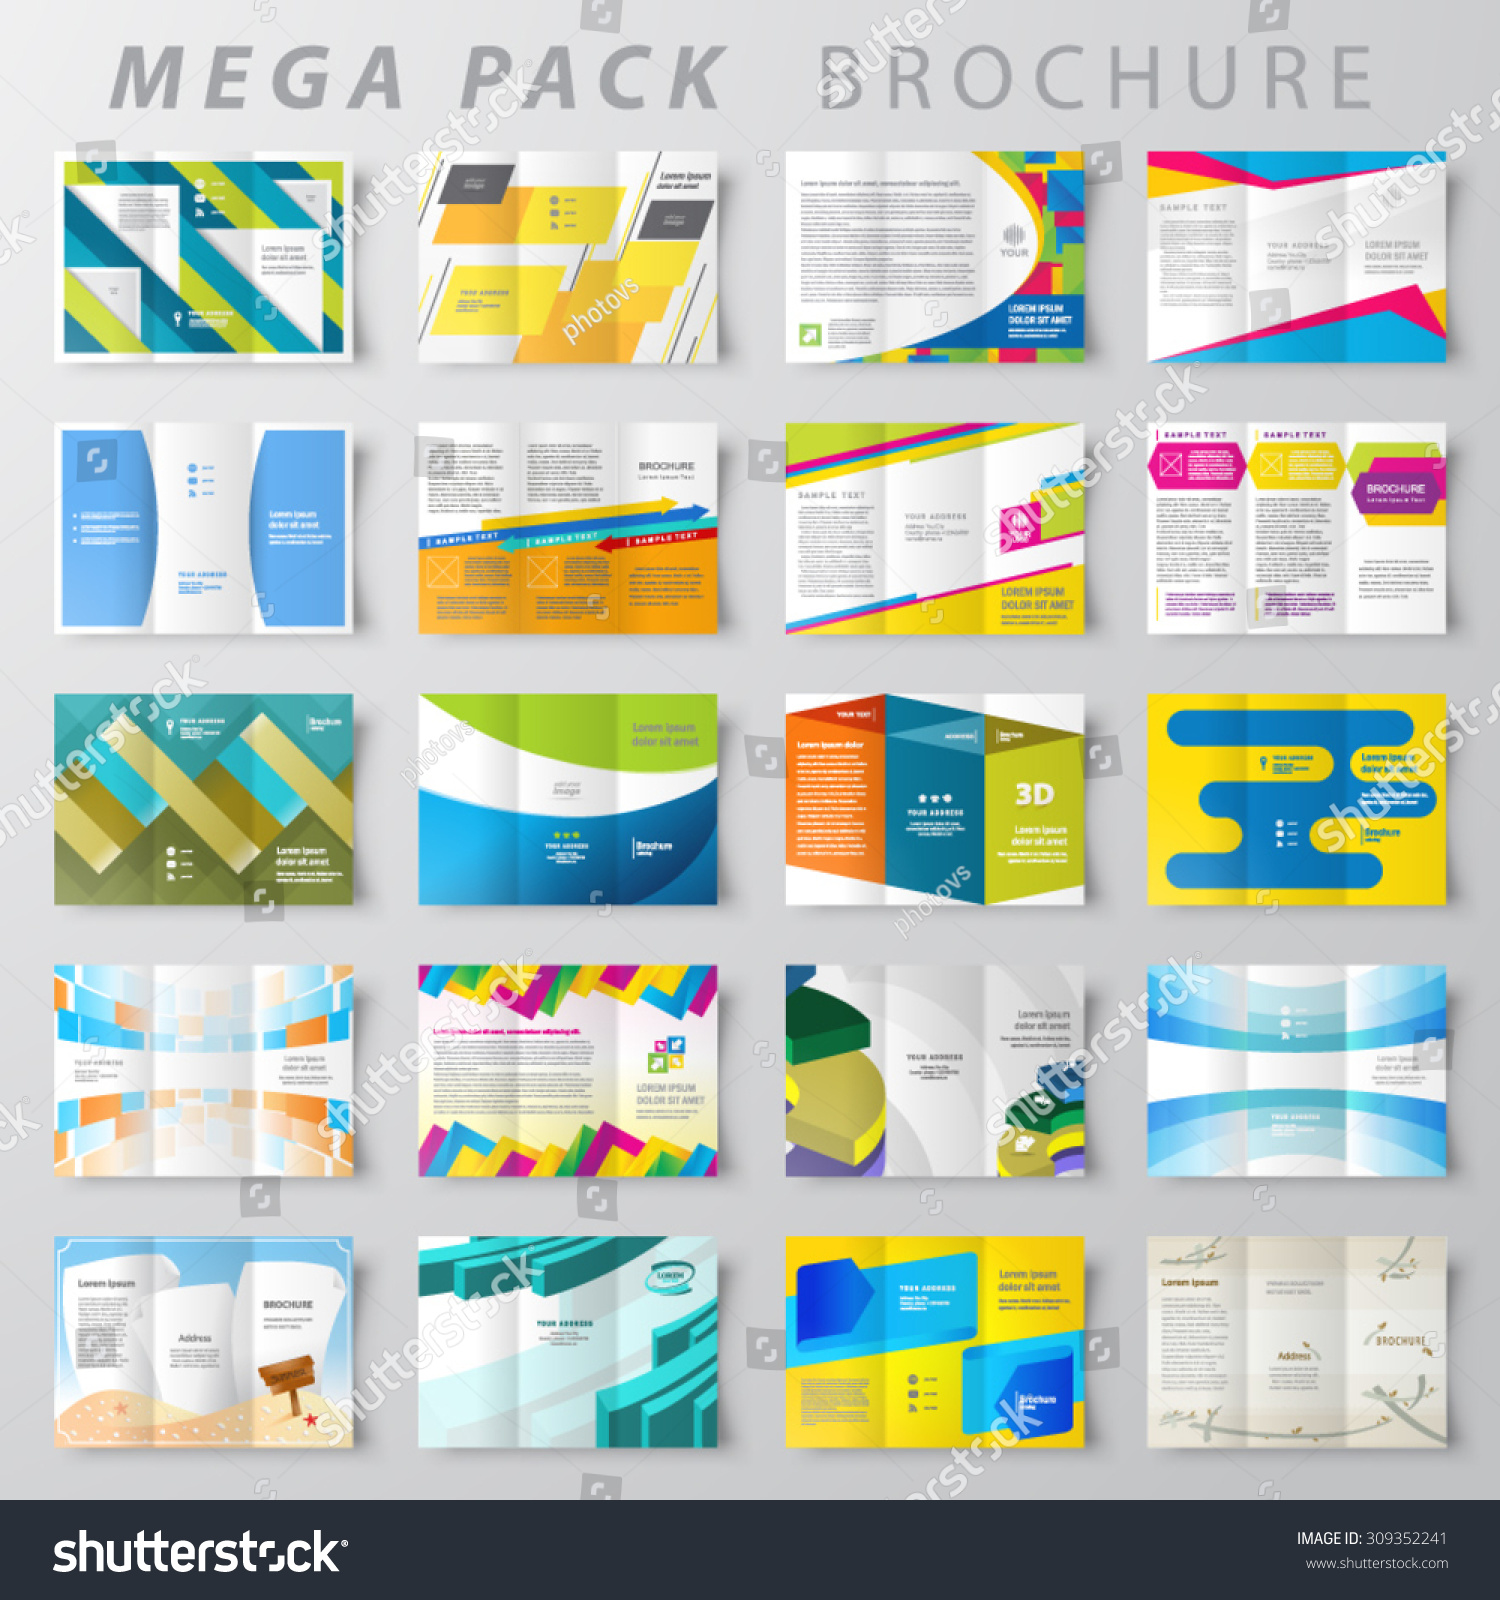 Mega sales graphics pack templates software squeeze pages